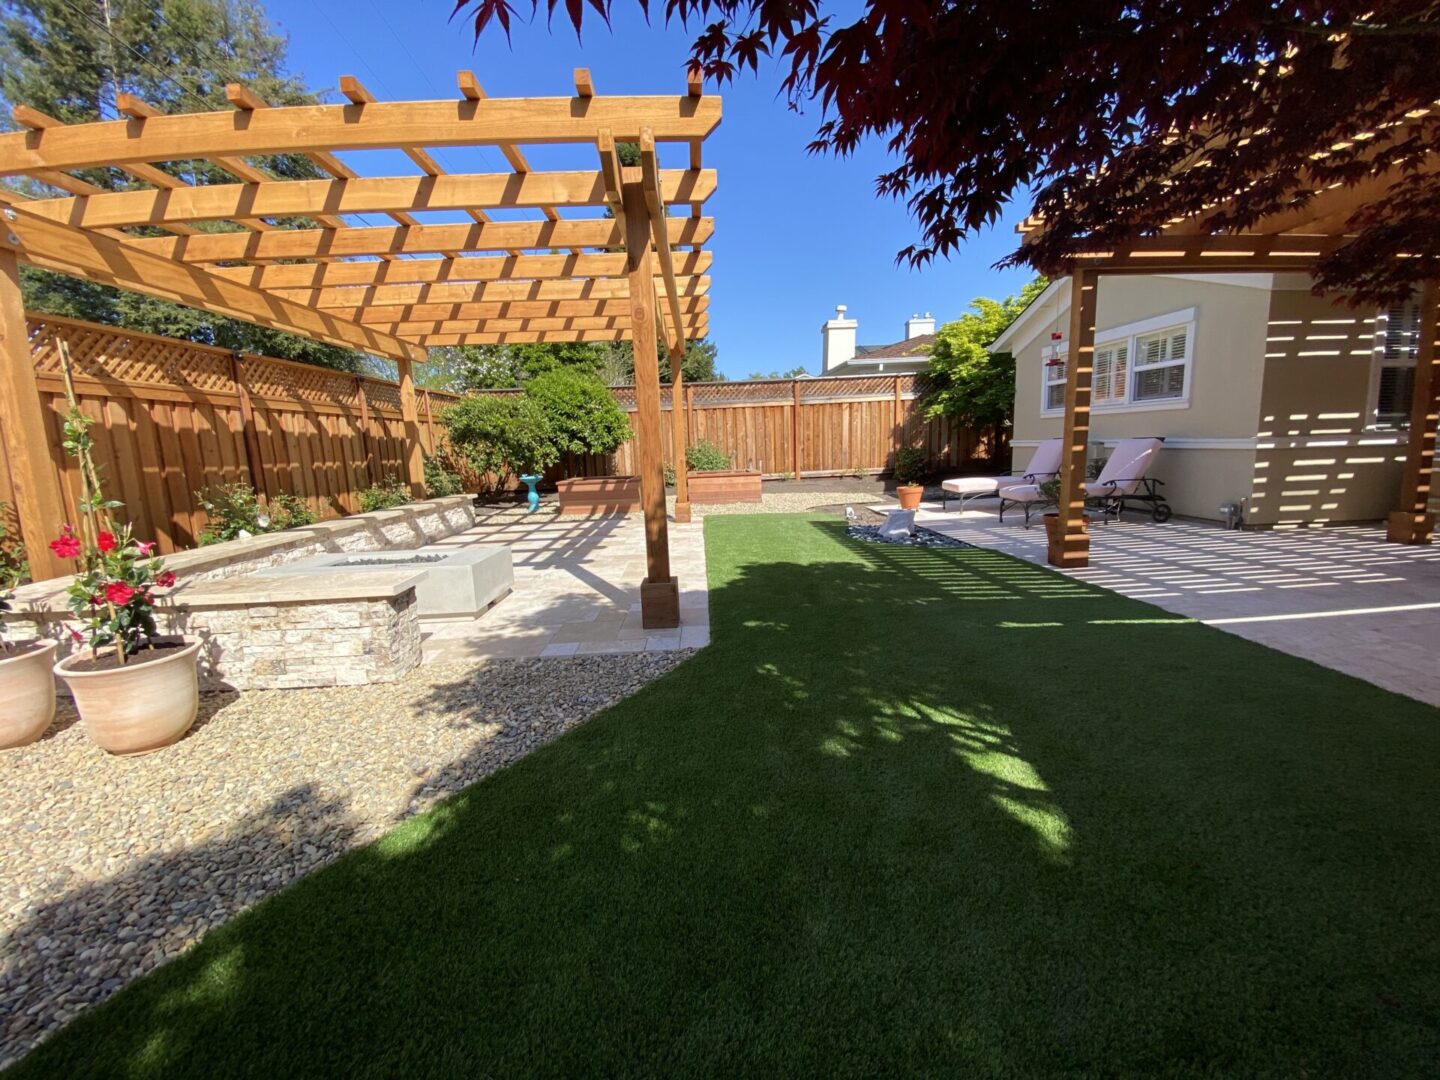 Artificial lawn in backyard, landscaping service by Guys Yard Design in Sonoma, CA